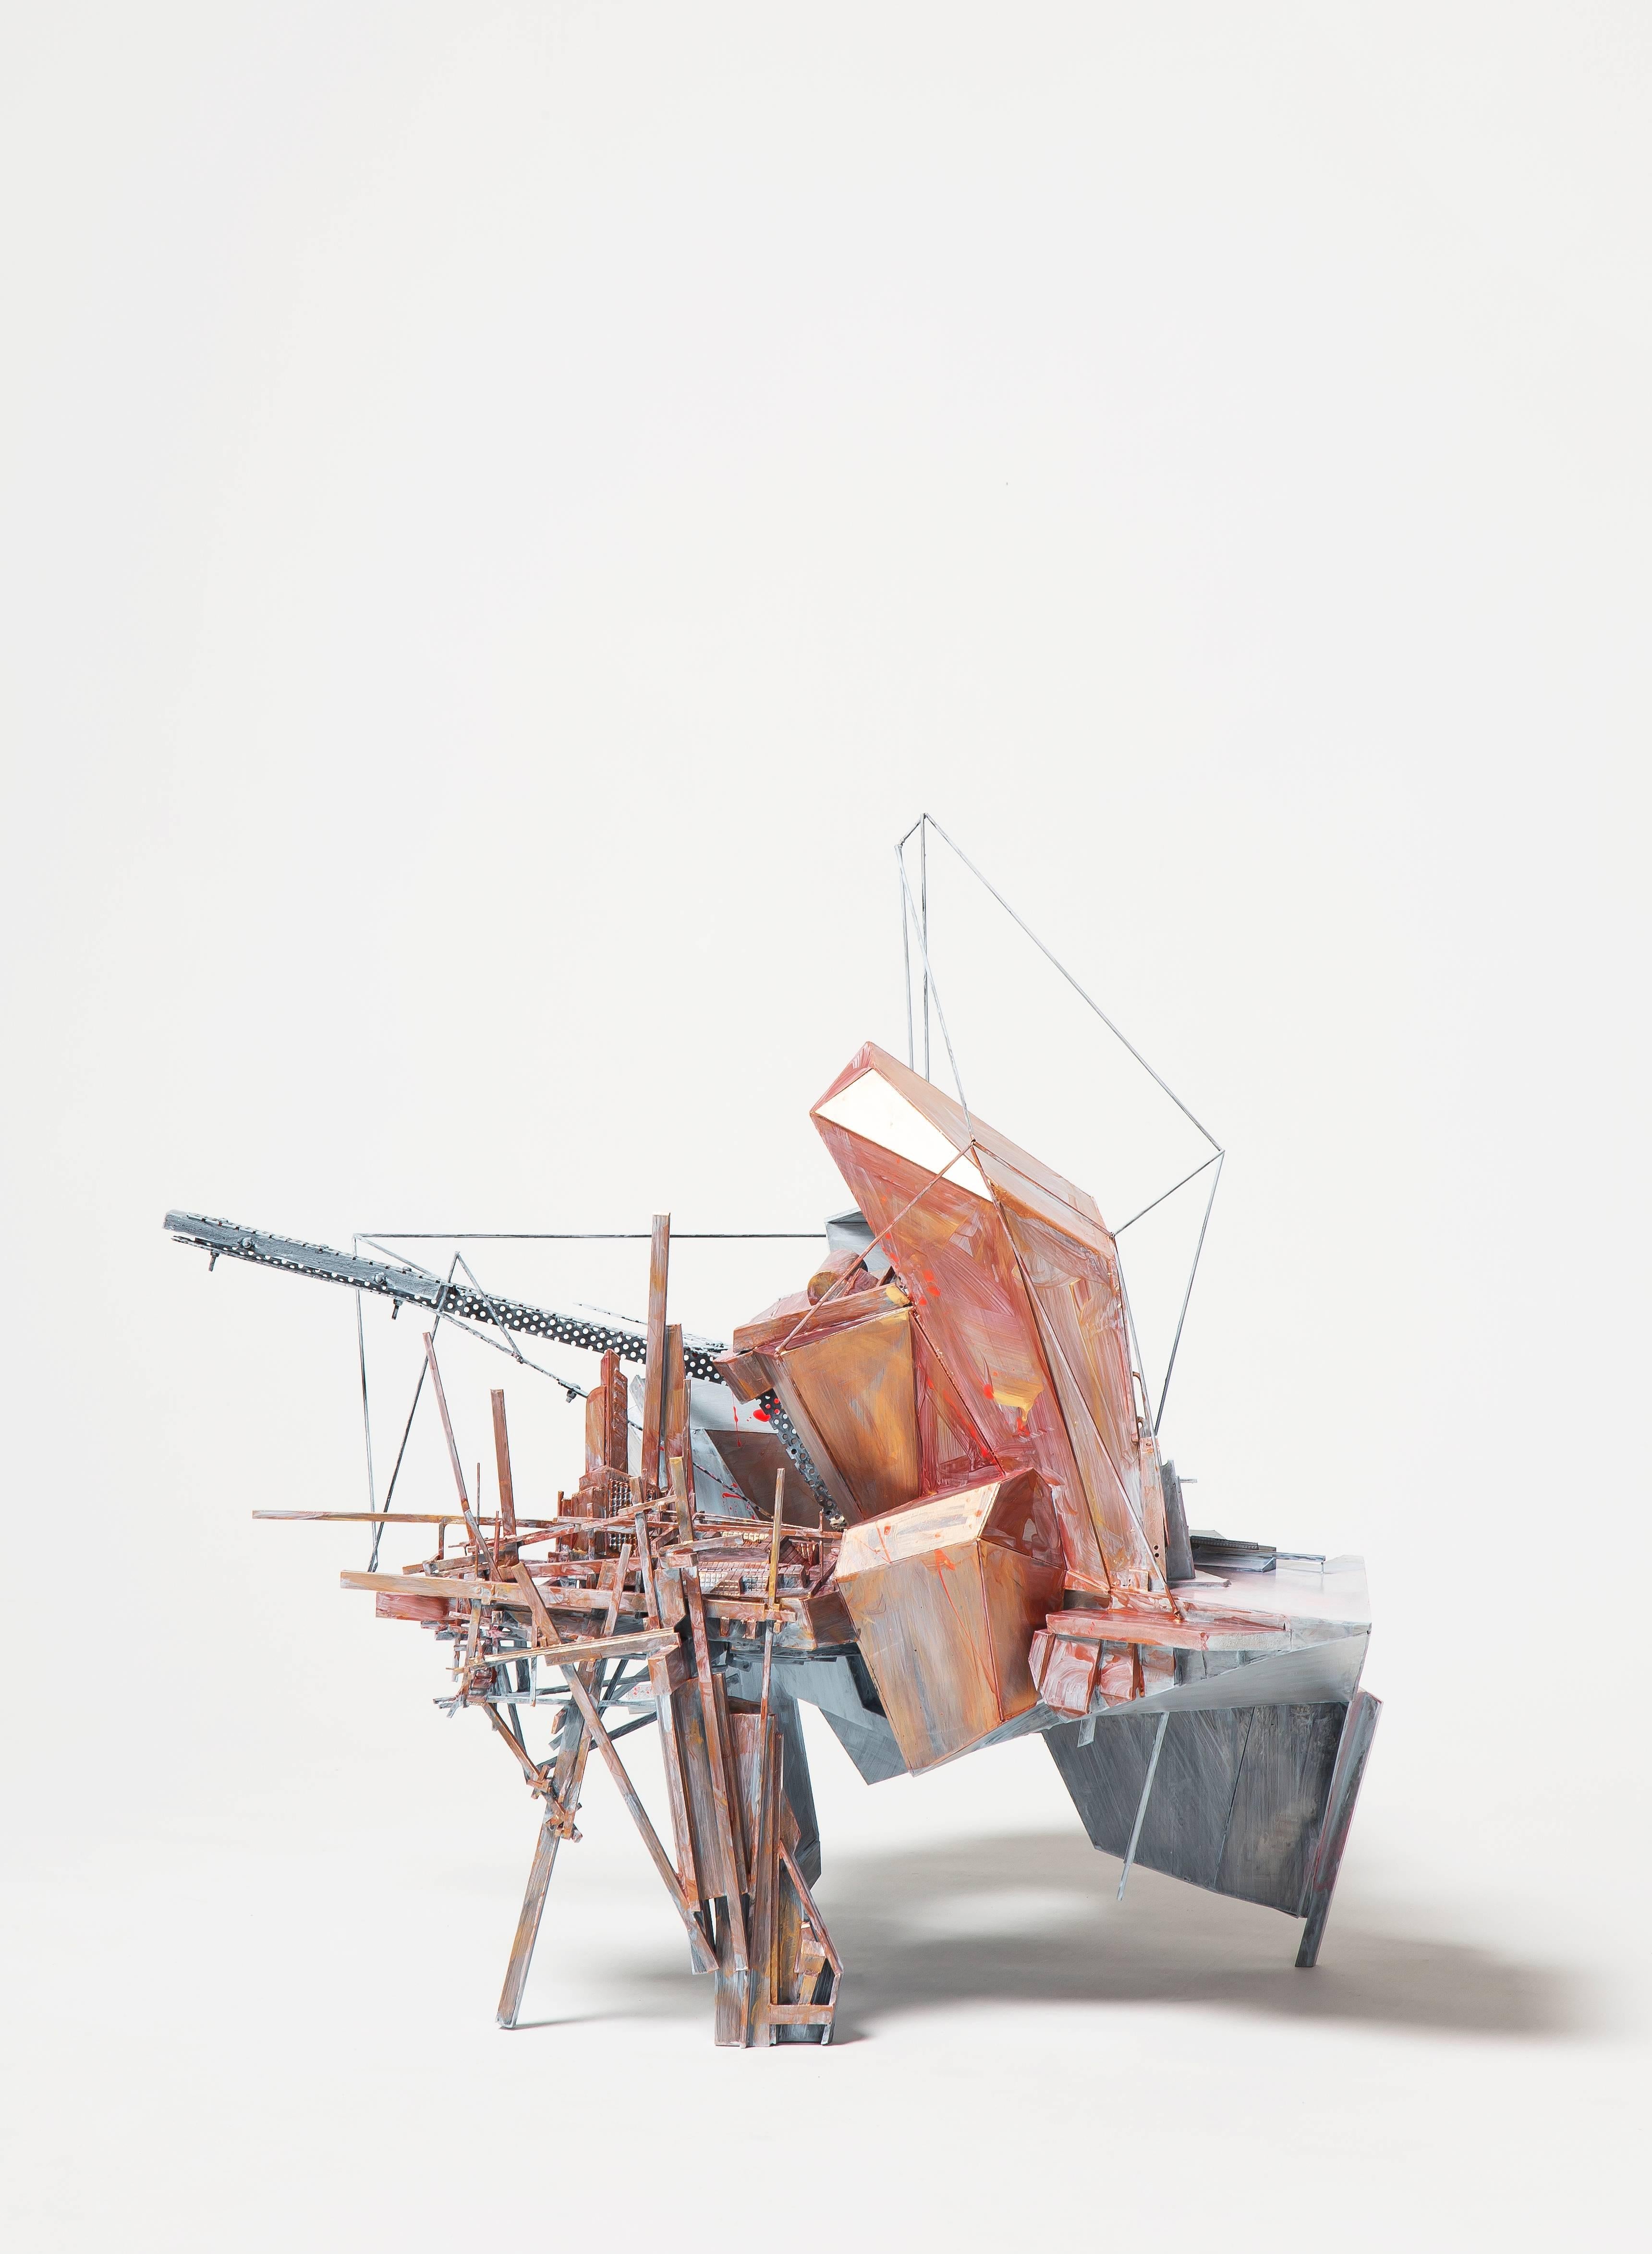 Lee Bul Abstract Sculpture - Untitled